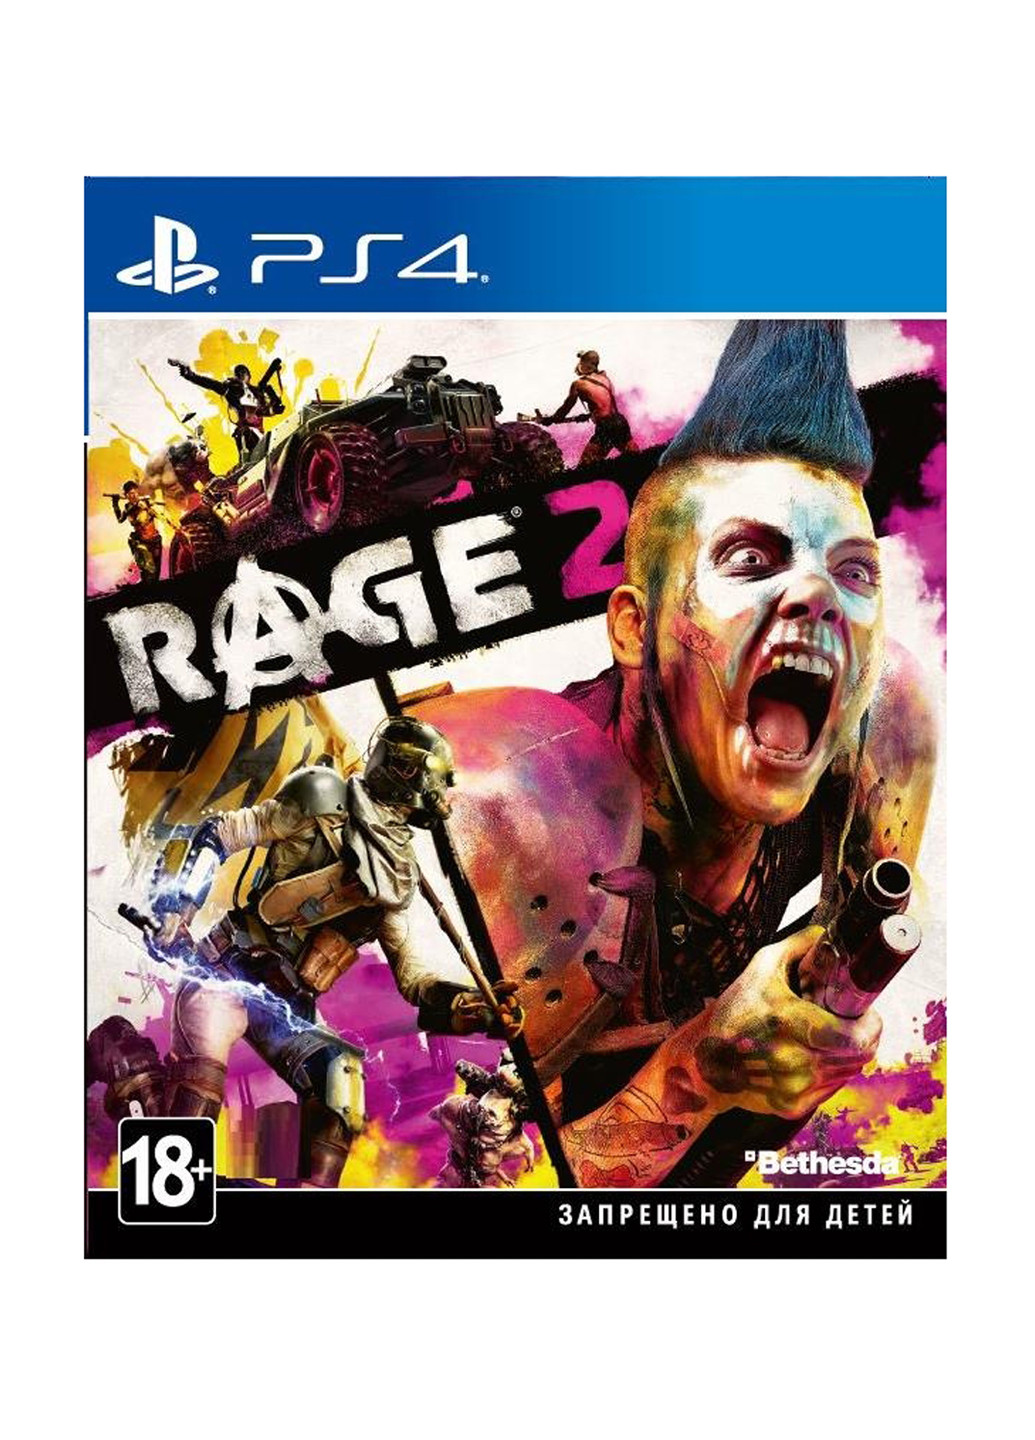 Games Software игра ps4 rage 2 [blu-ray диск] (150134266)